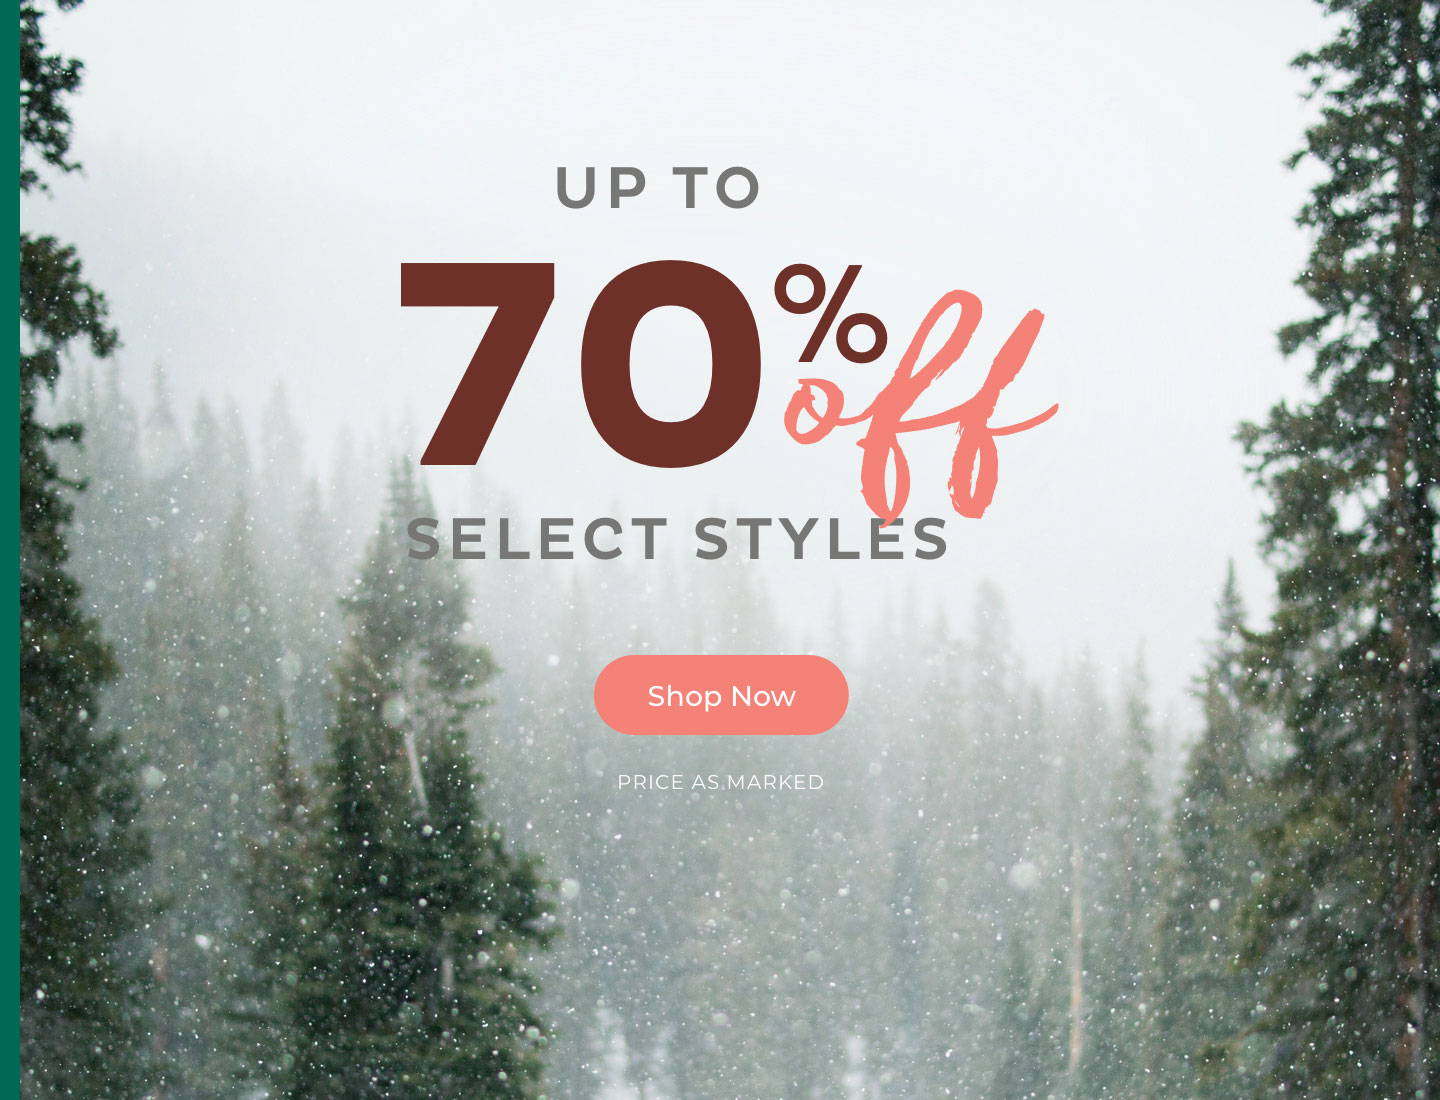 Up to 70% Off Select Styles